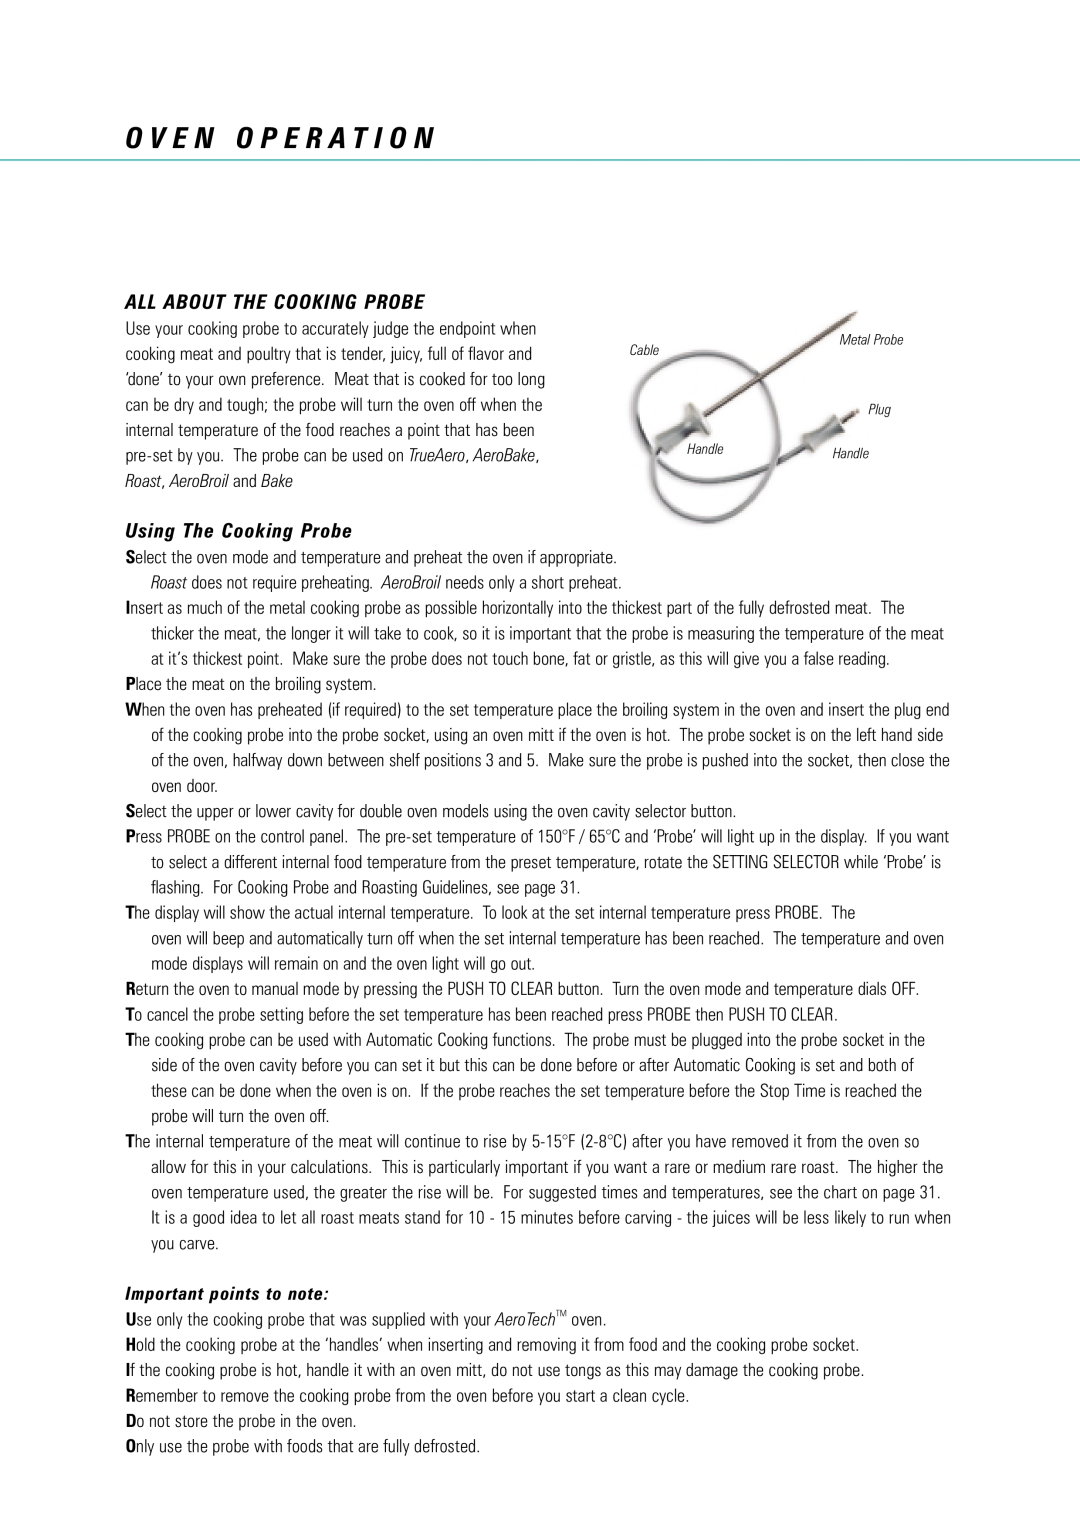 Fisher & Paykel AeroTech manual All About The Cooking Probe, Using The Cooking Probe, Important points to note 